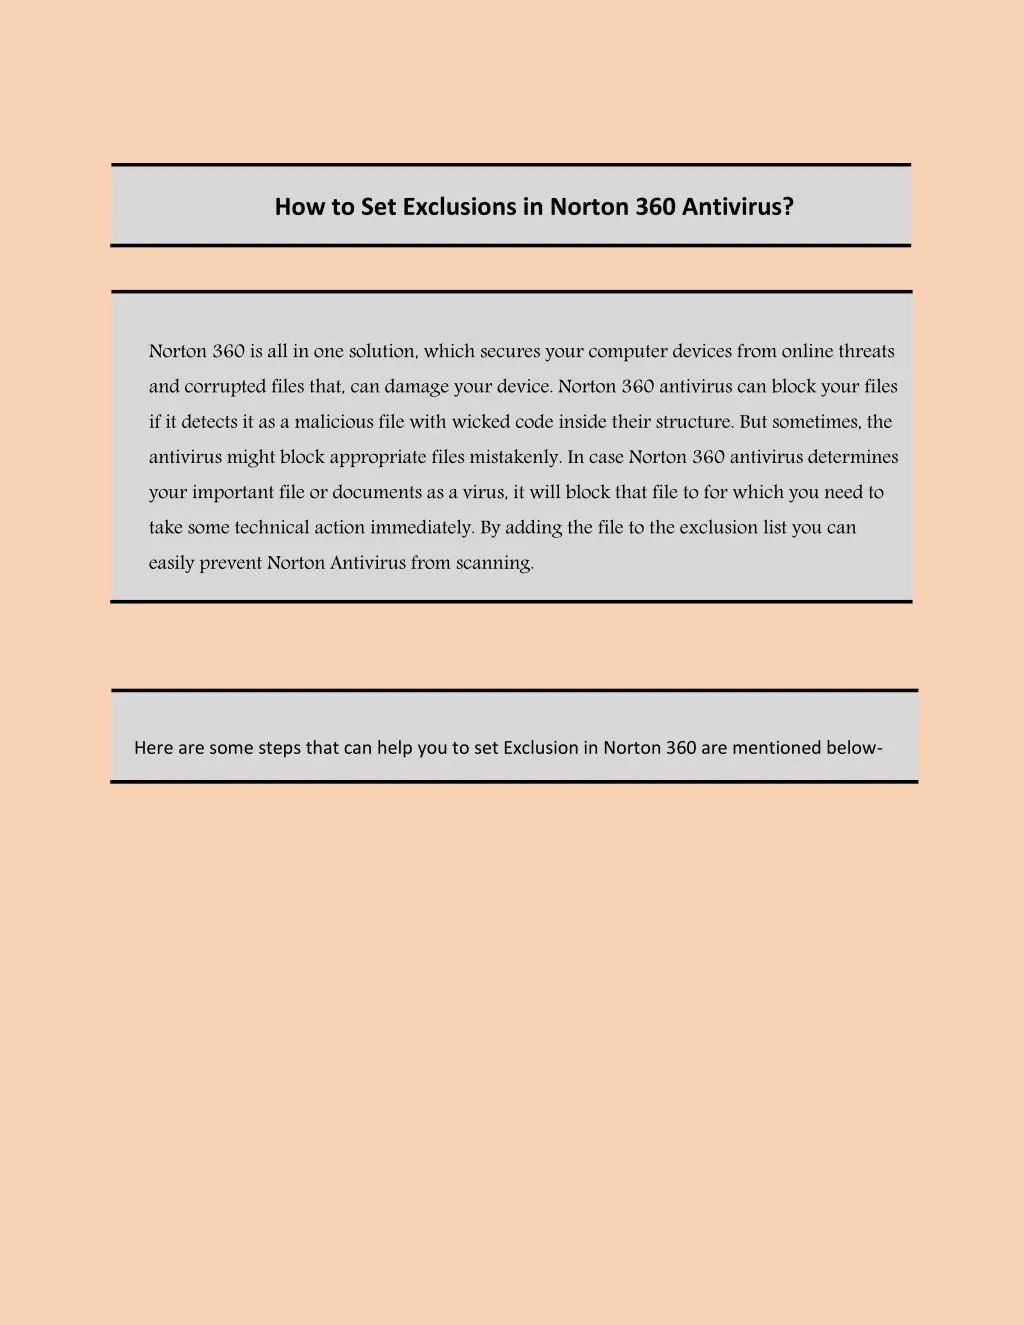 how to set exclusions in norton 360 antivirus